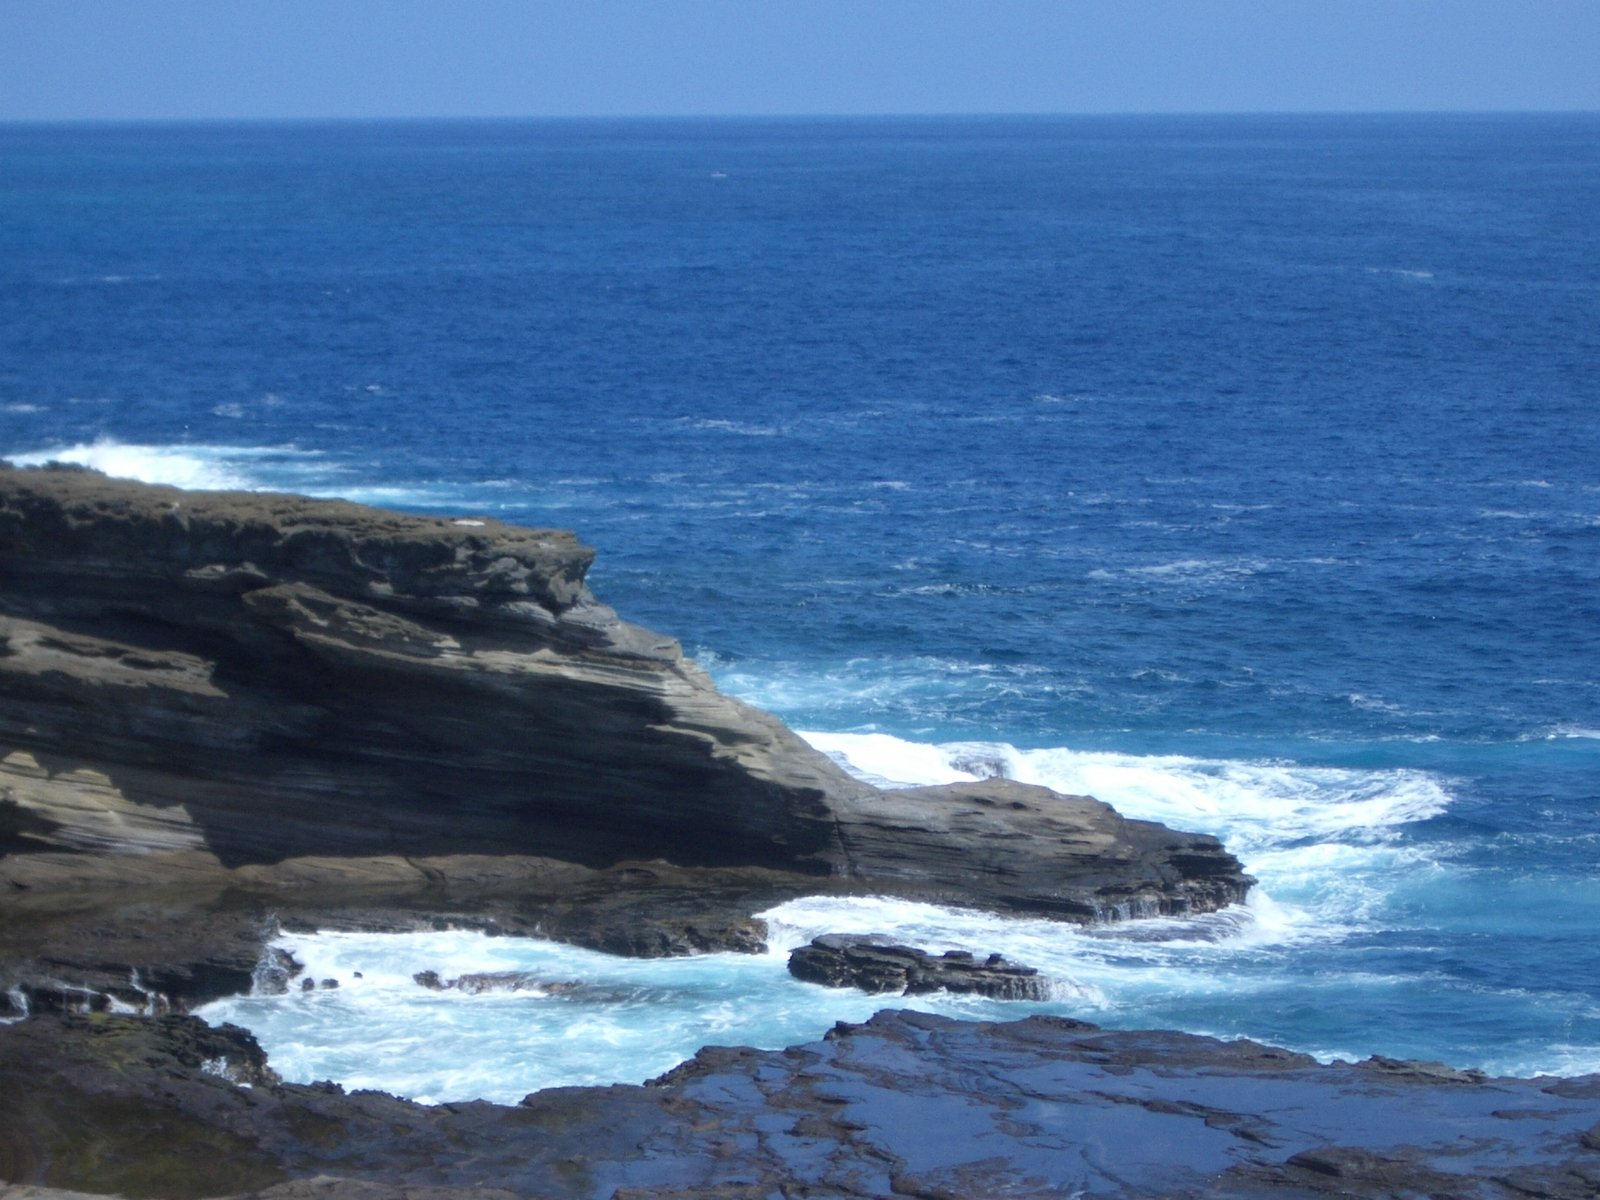 a rocky cliff with the ocean and rocks below it